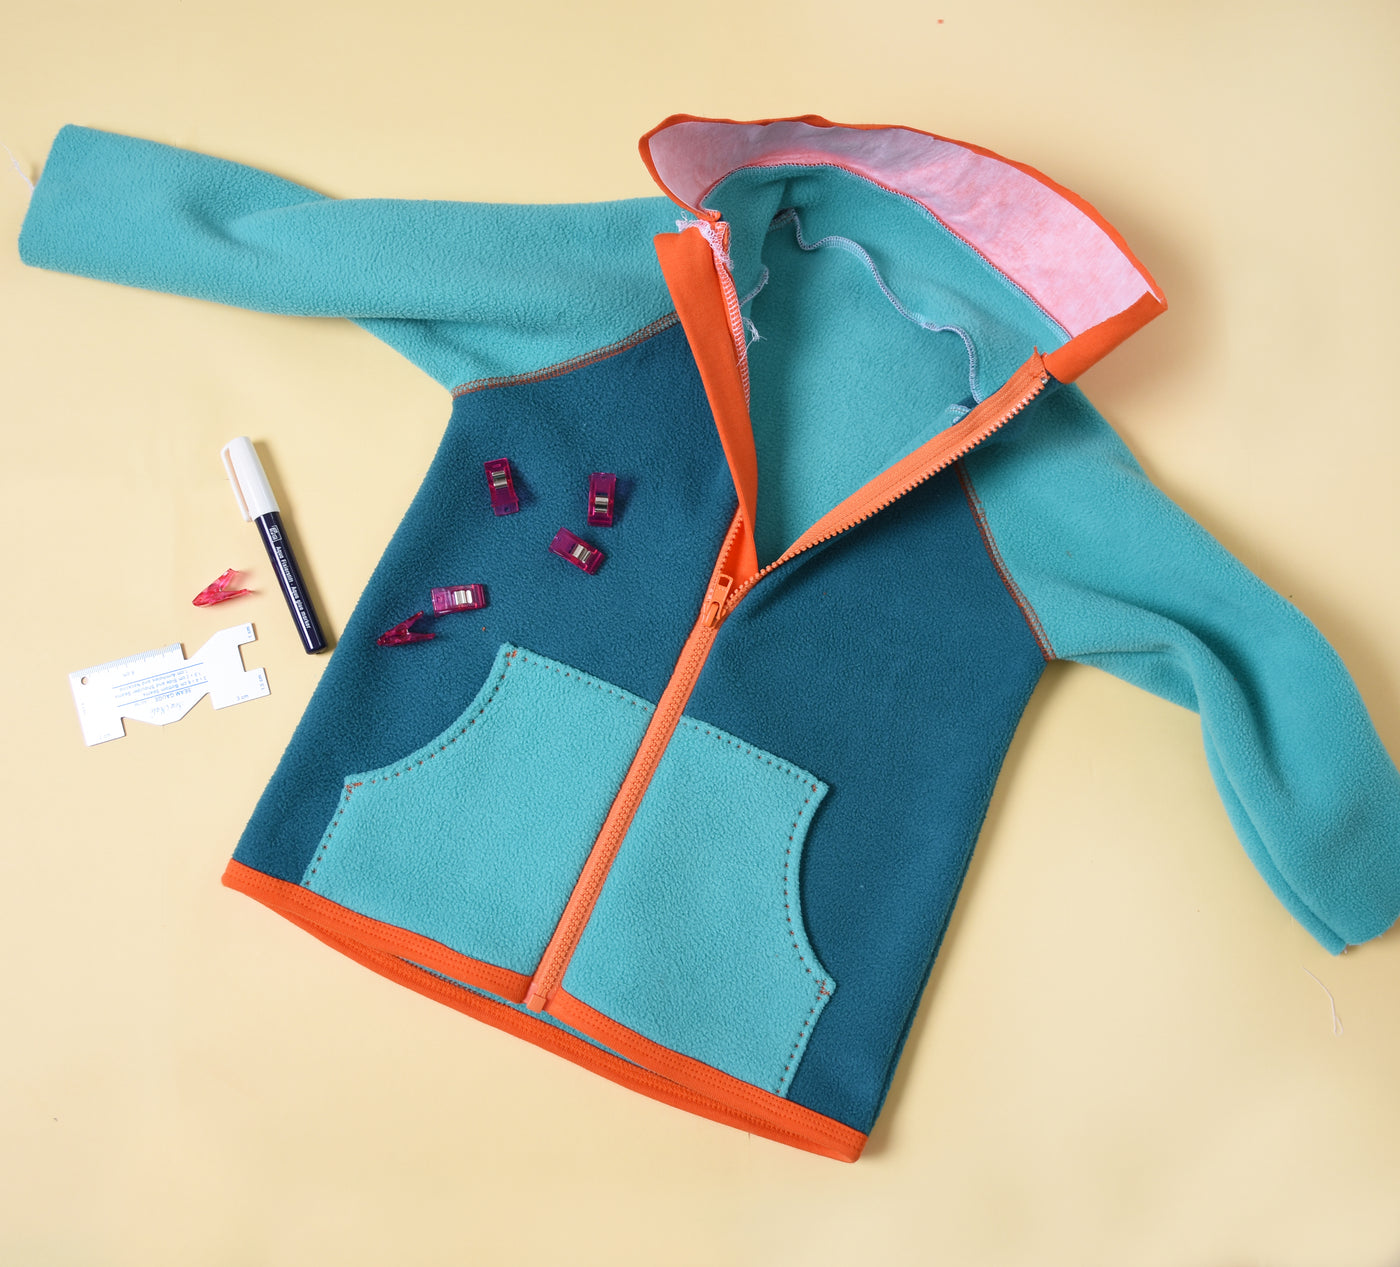 Wilma & Wide jacket - fabric and materials requirements